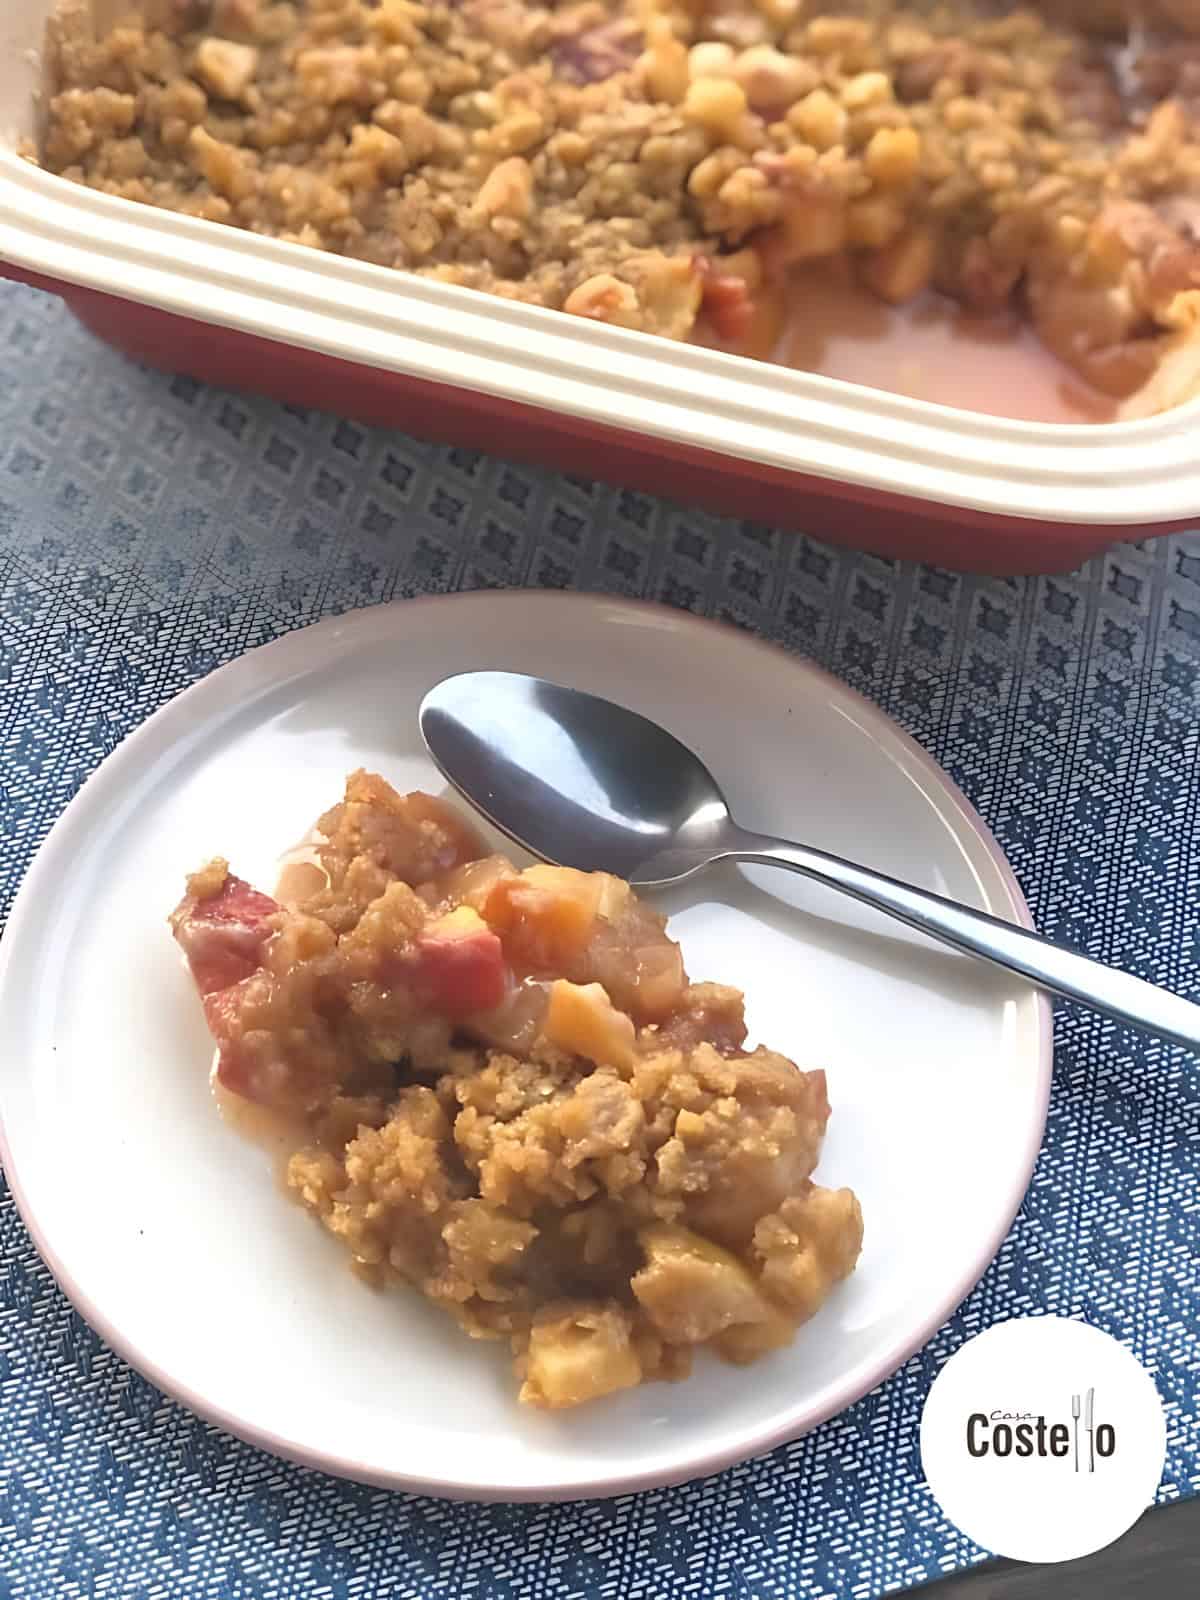 A serving of peach and marzipan crumble on a plate.